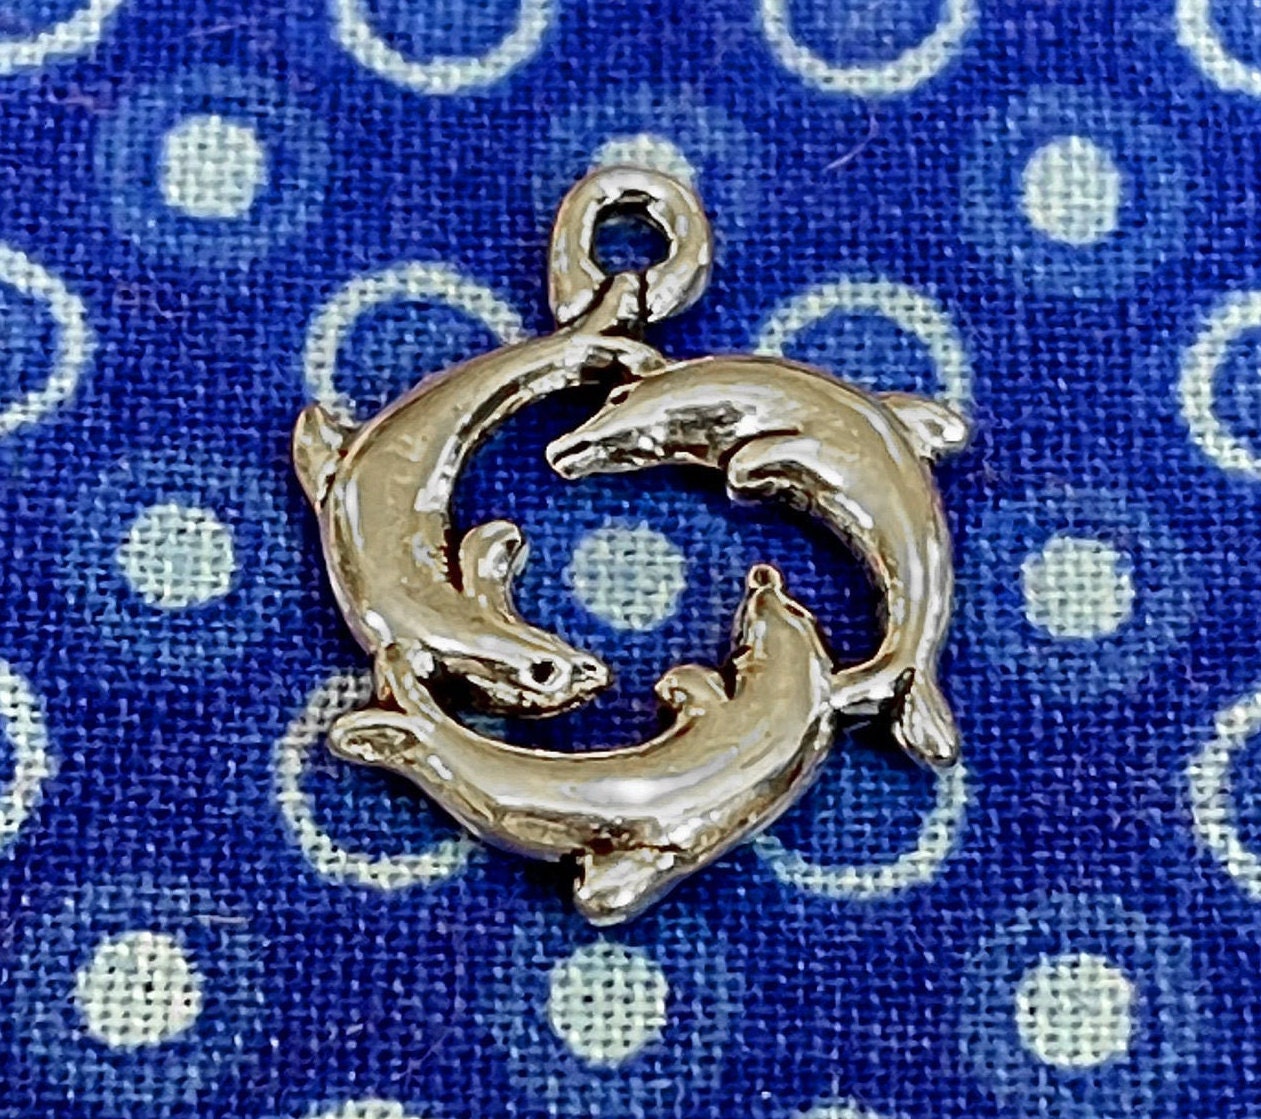 Three dolphins charm - 21x16 mm - Antique Silver tone - ocean cetaceans - swimming circle - mystic sea life pendant for personalized jewelry